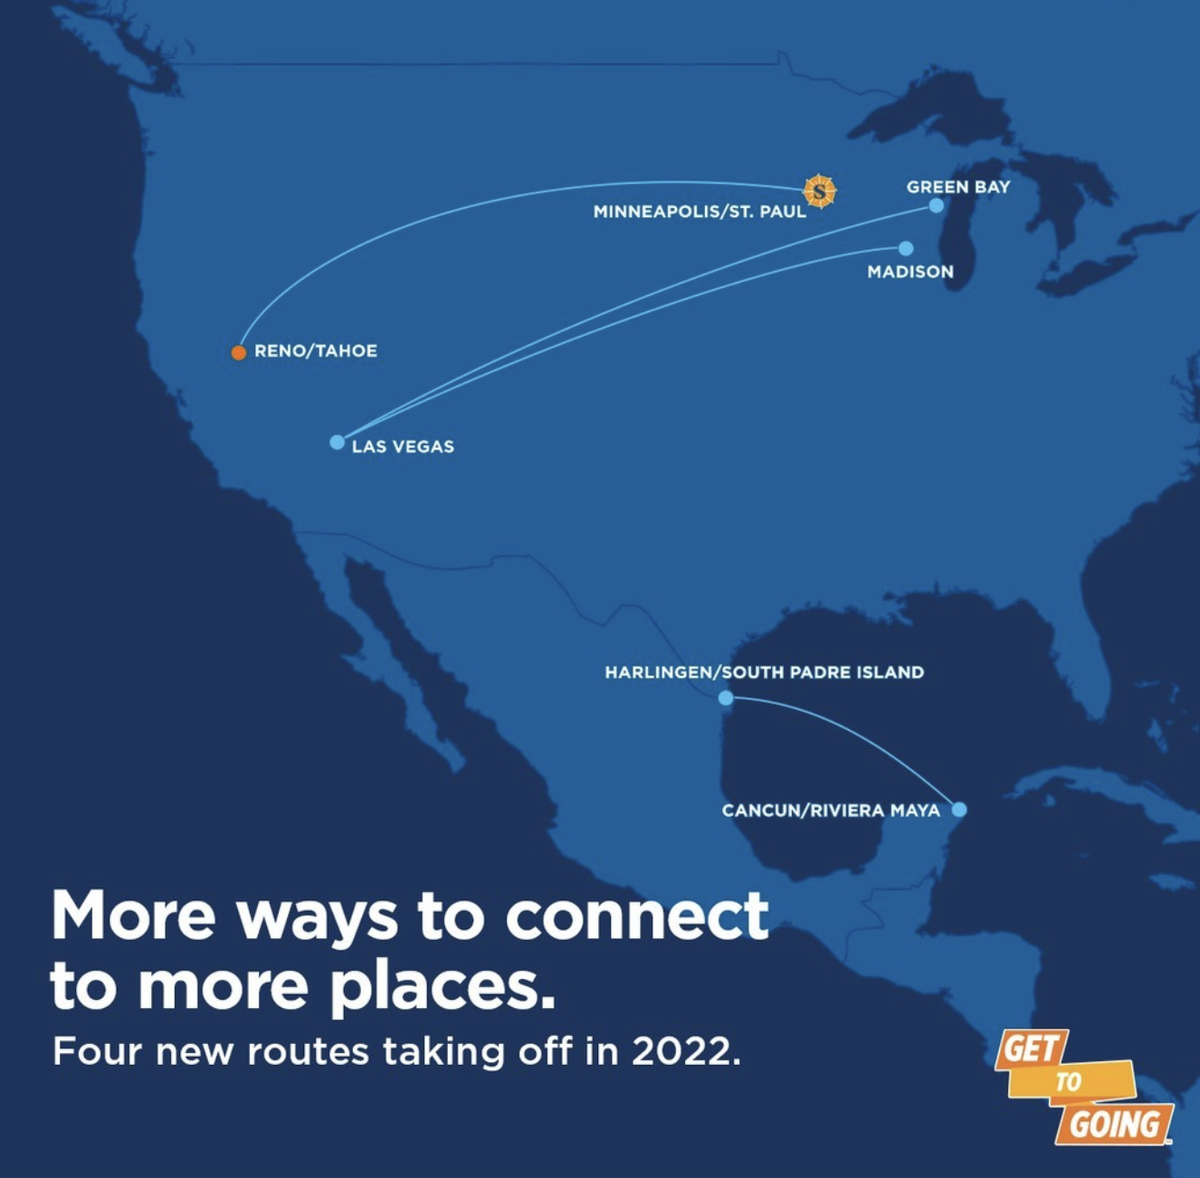 Sun Country's new routes